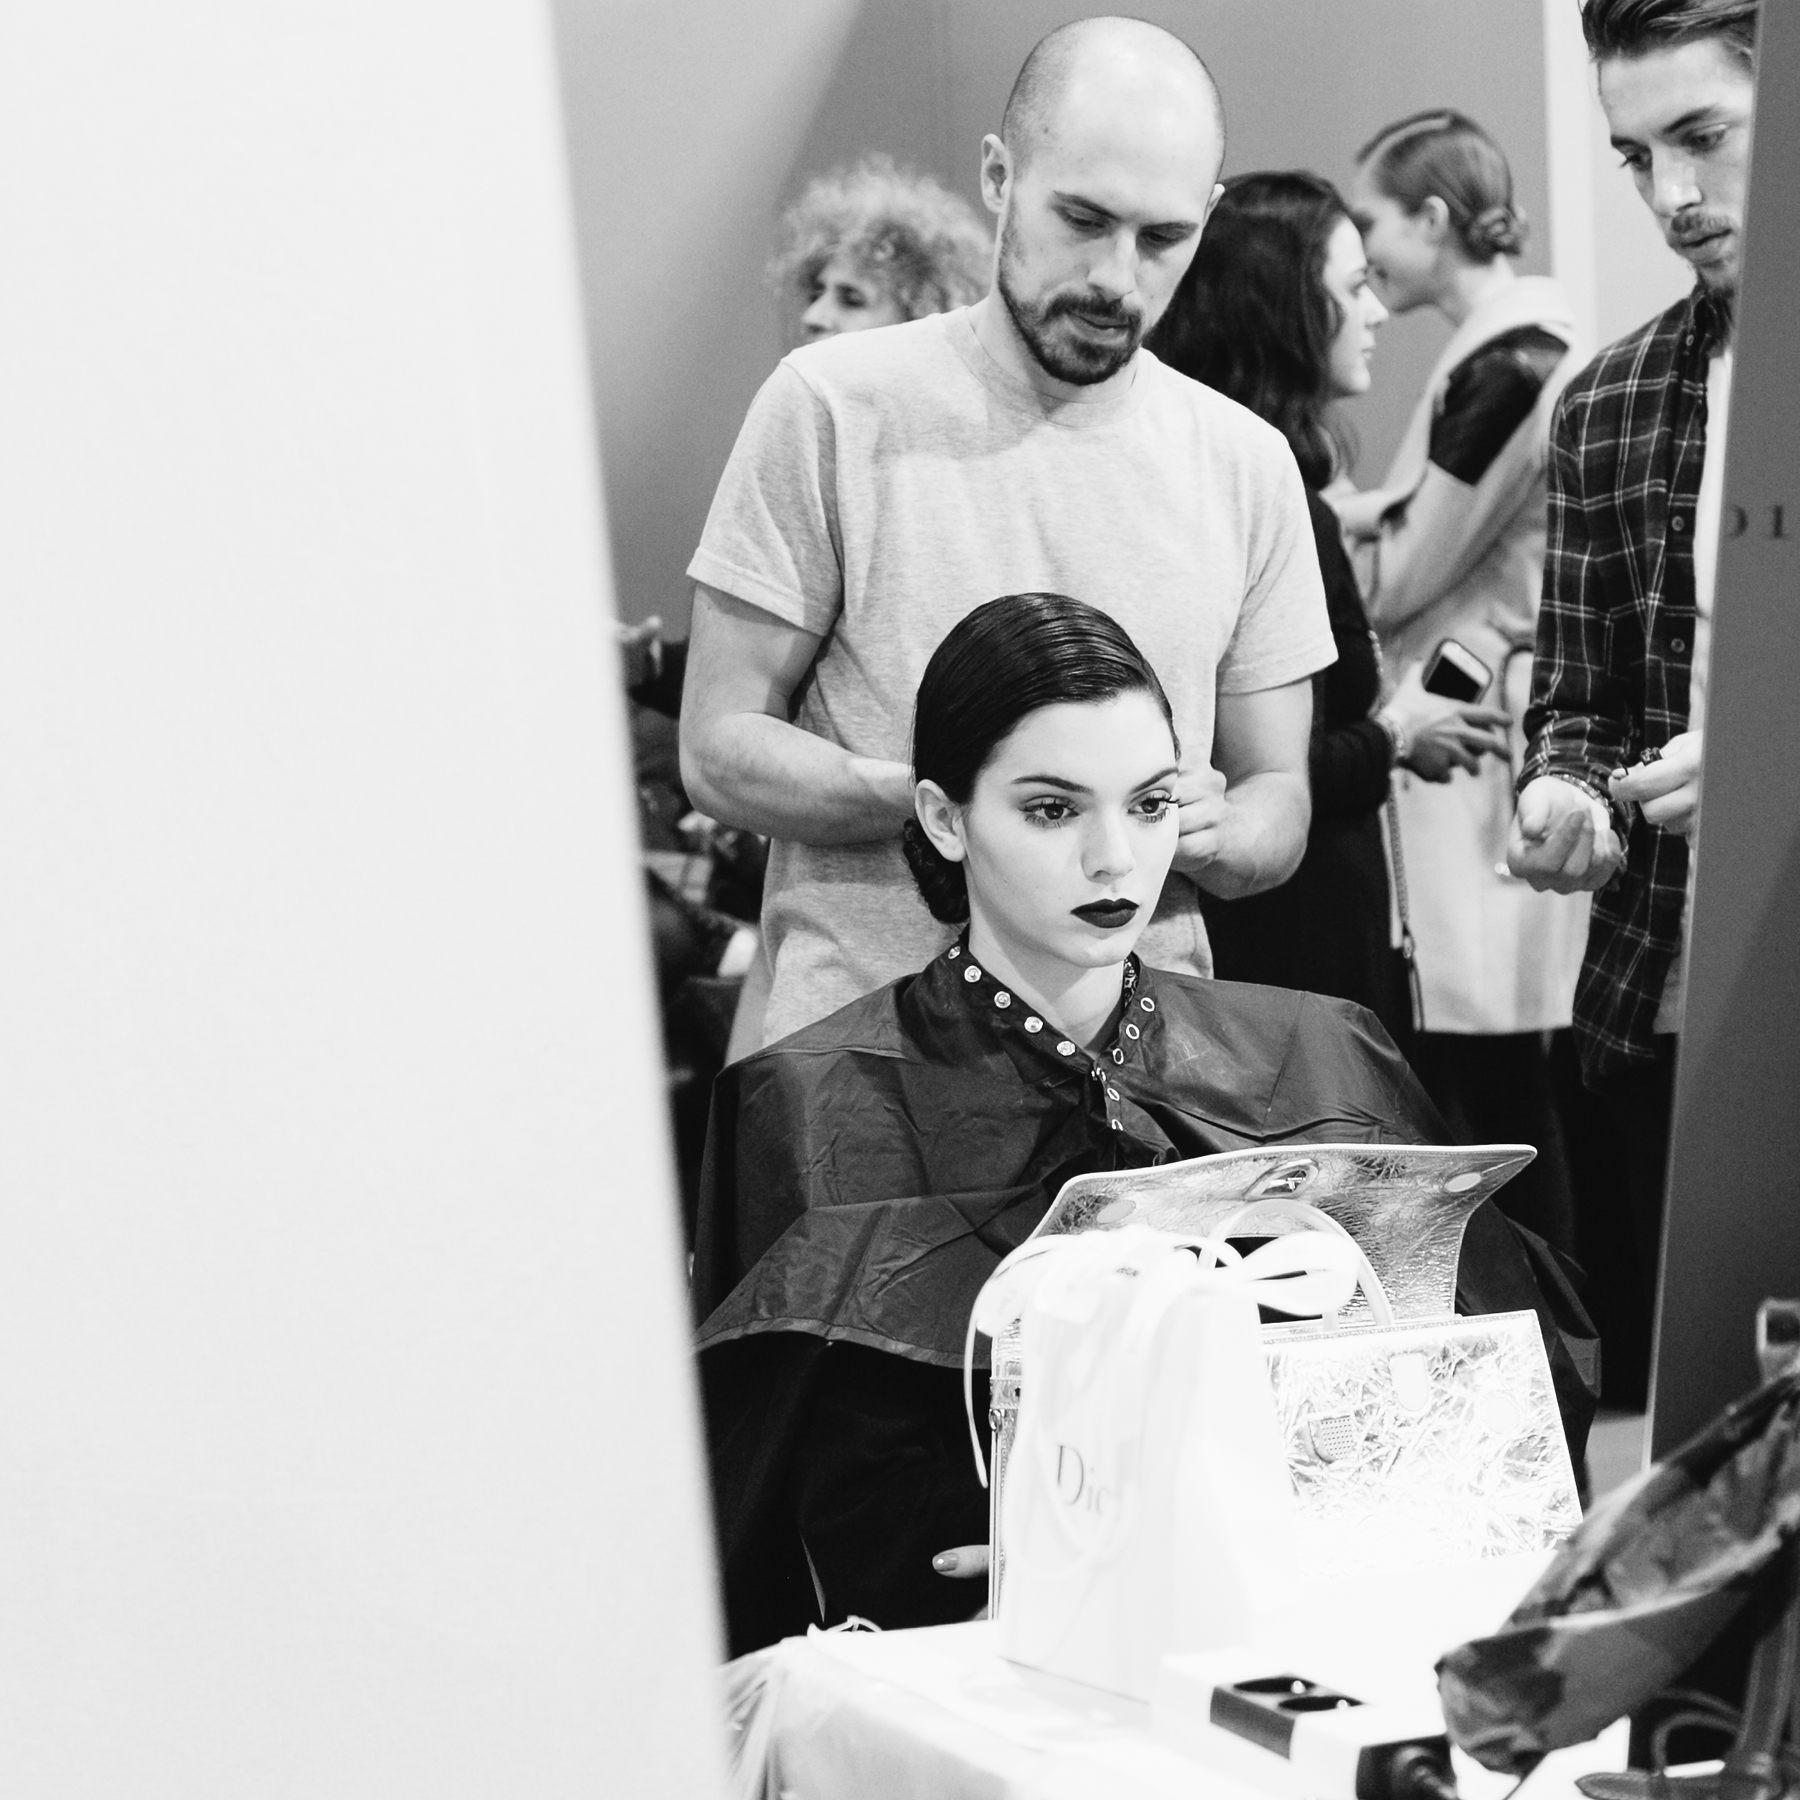 EXCLUSIVE: Kendall Jenner backstage at Dior FW 16 – TOMBOY Beauty